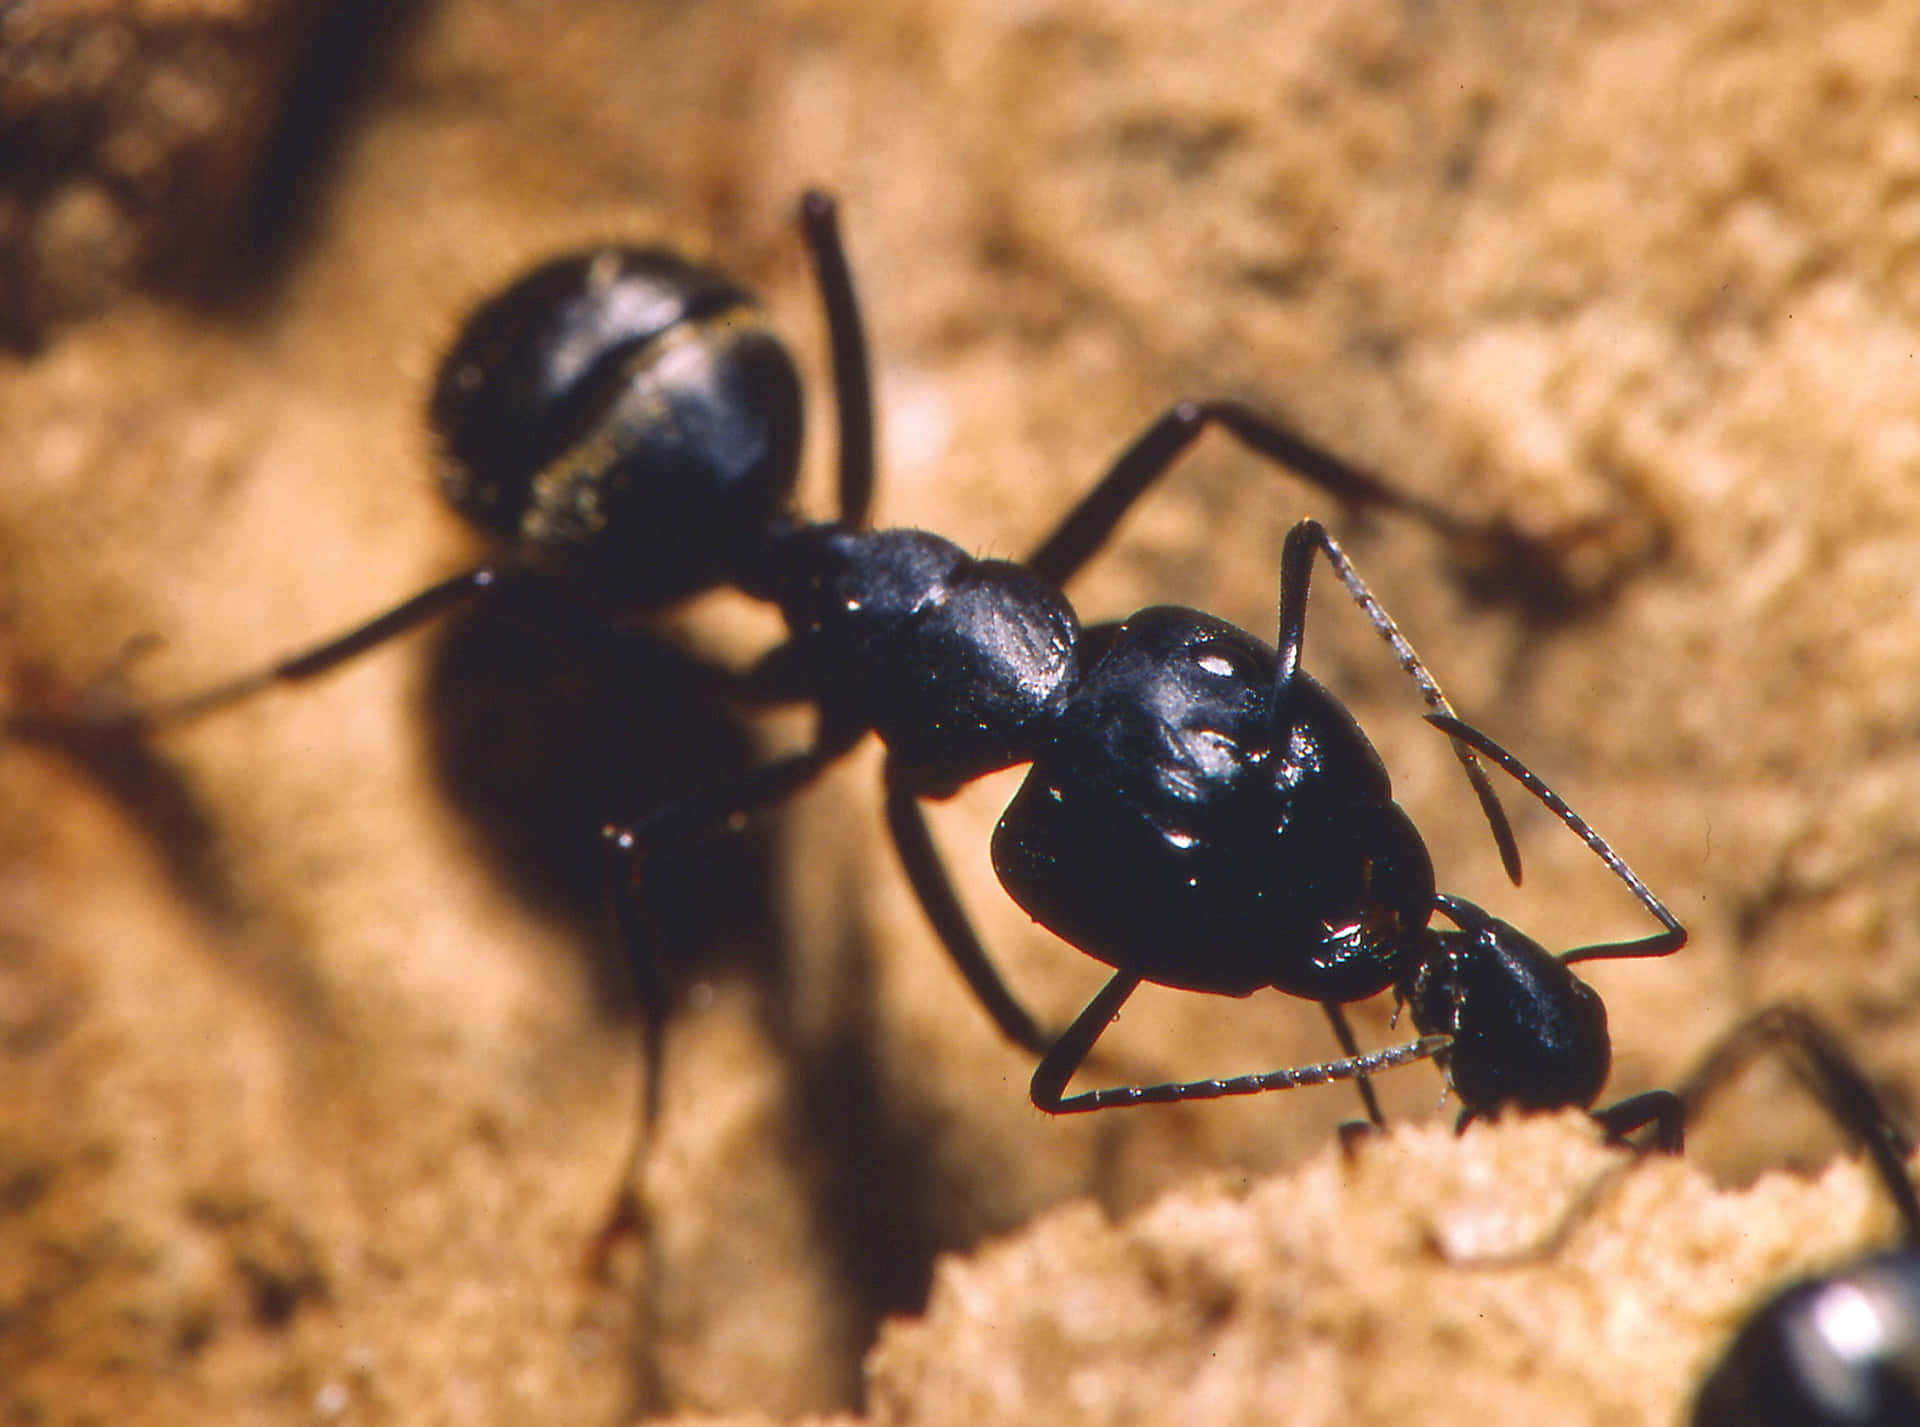 Courage and strength in the tiny bodies of an ant